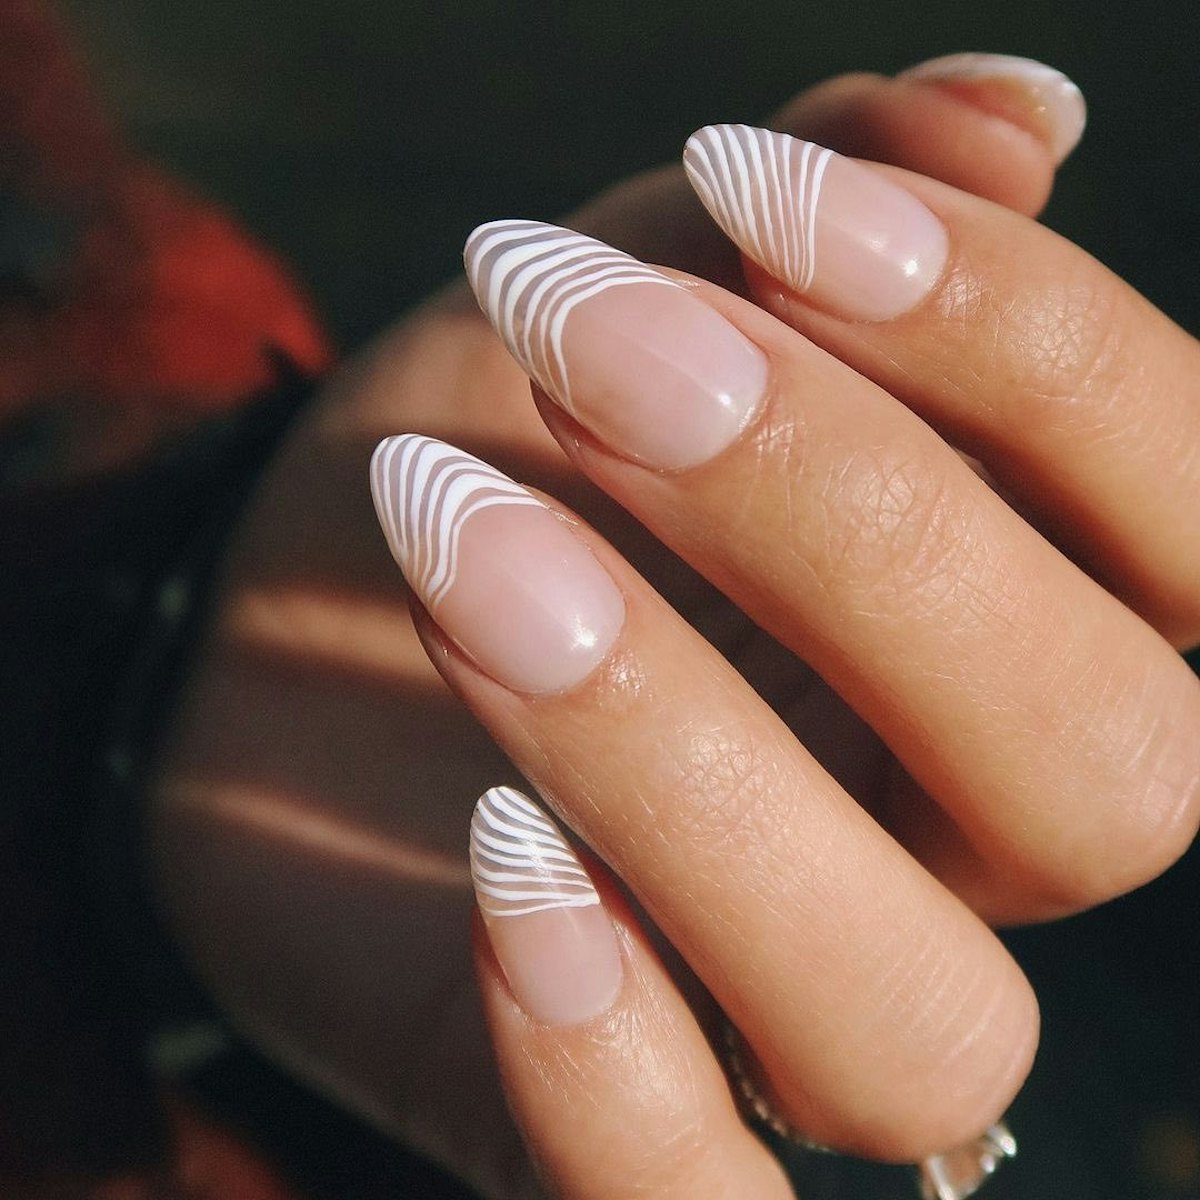 Virgo season 2022 is here. Check out these simple, minimalistic nail art design ideas for manicure i...